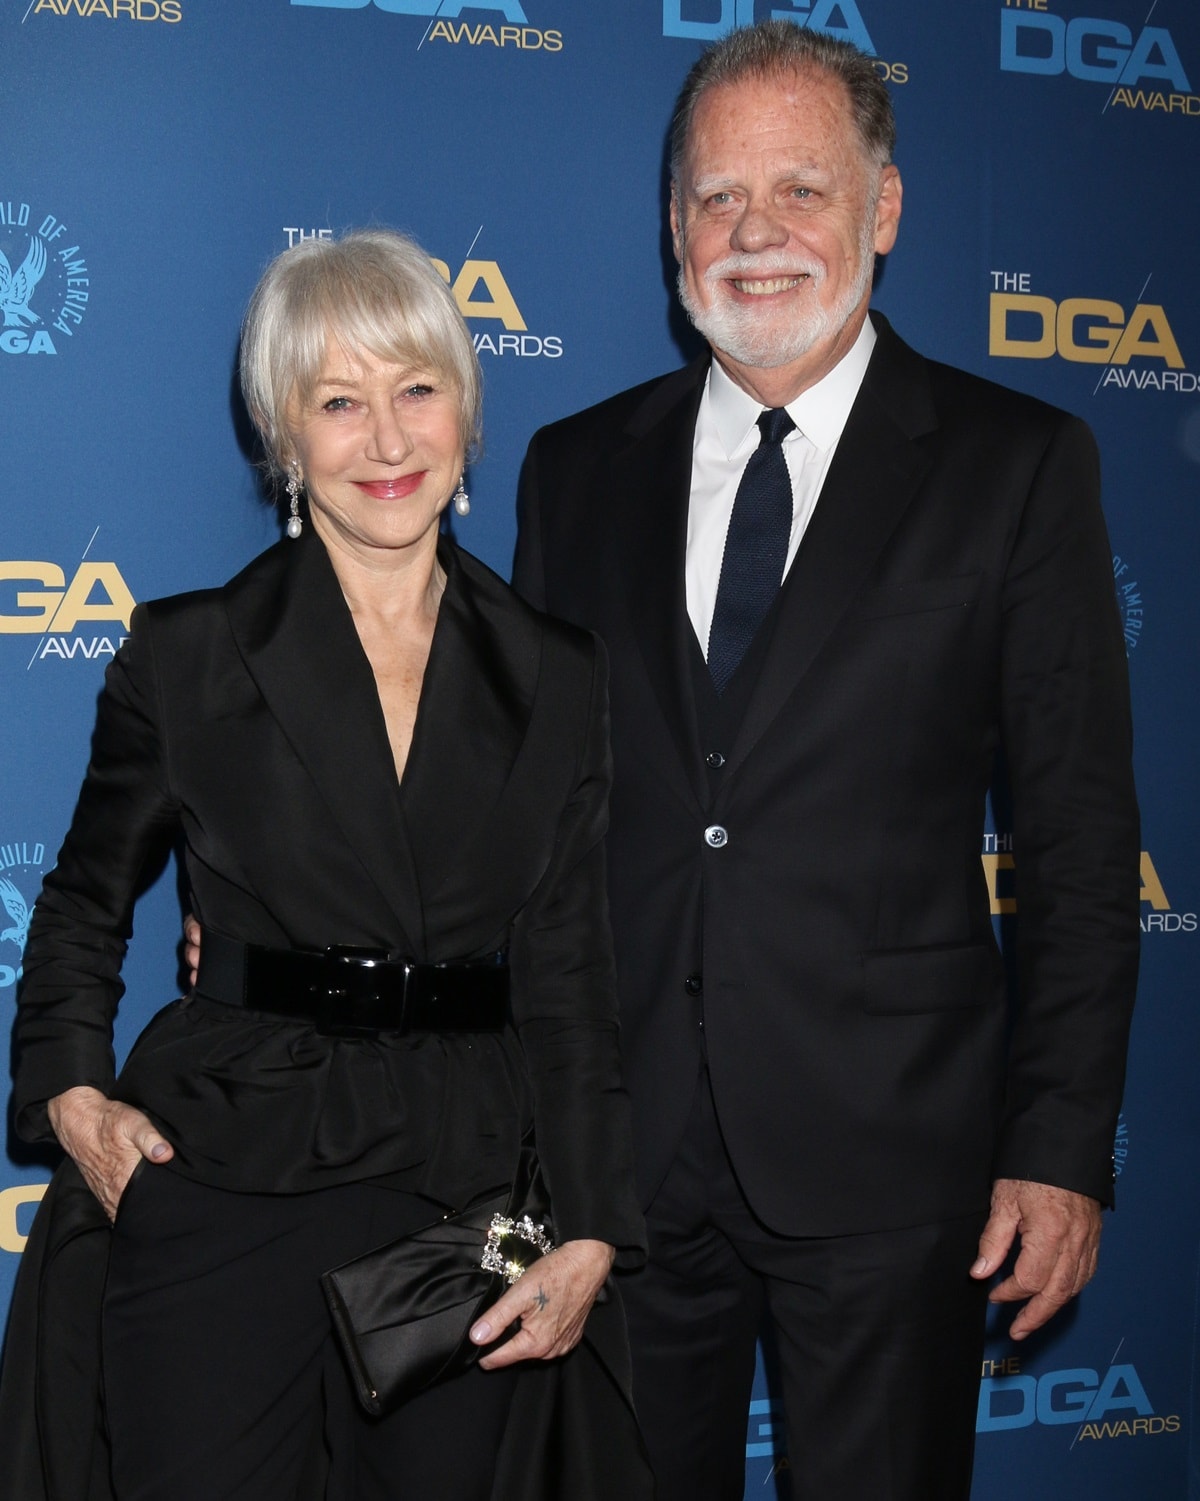 Helen Mirren and Taylor Hackford met in 1985 while working on the film 